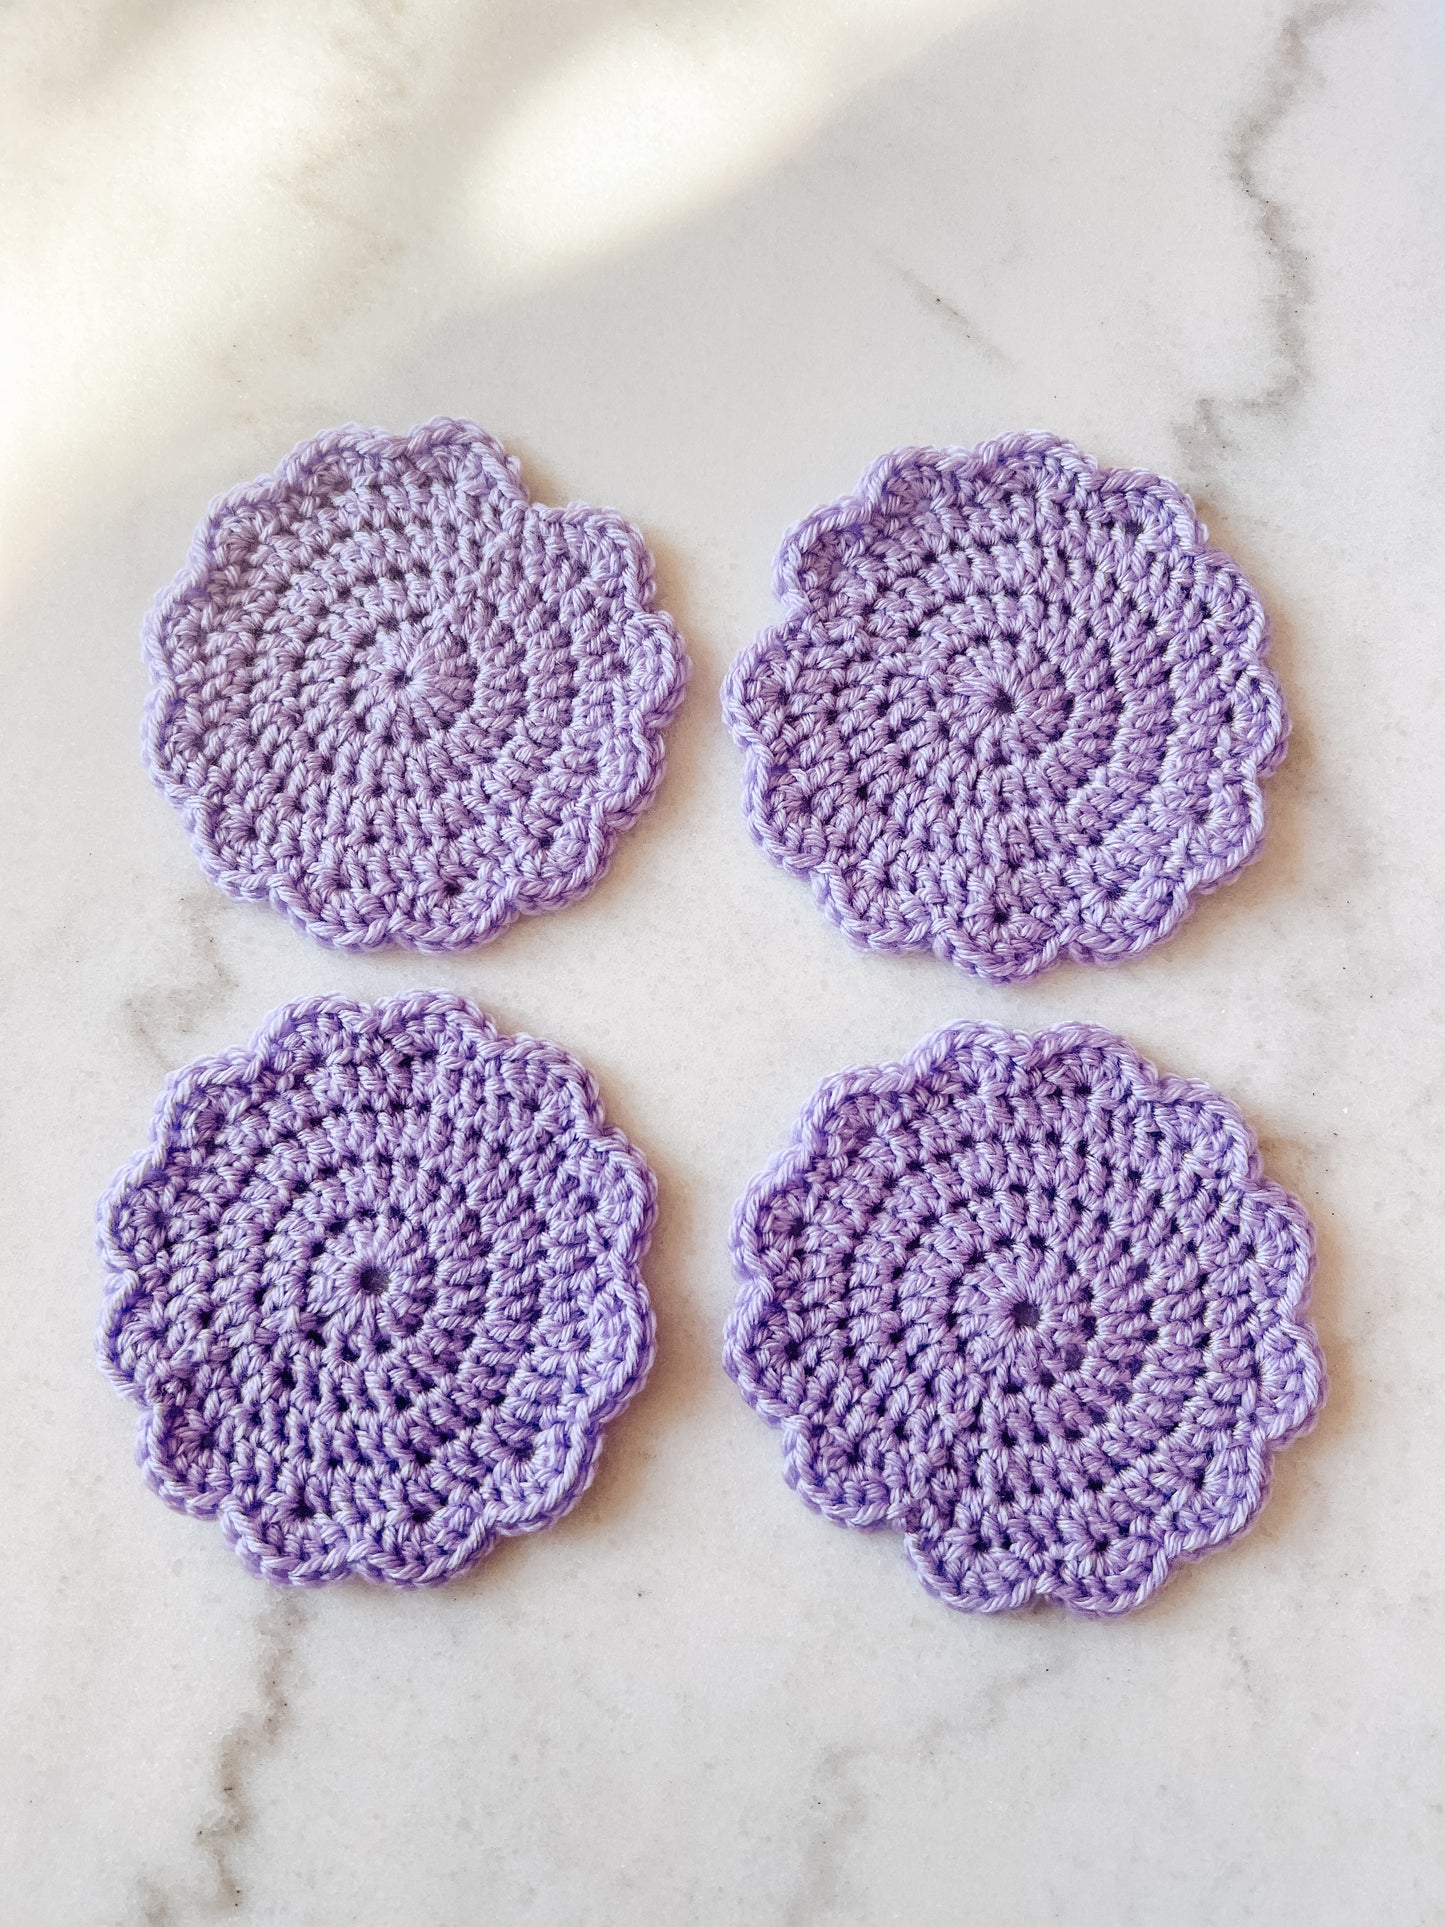 Crocheted Coasters (Set of 4)